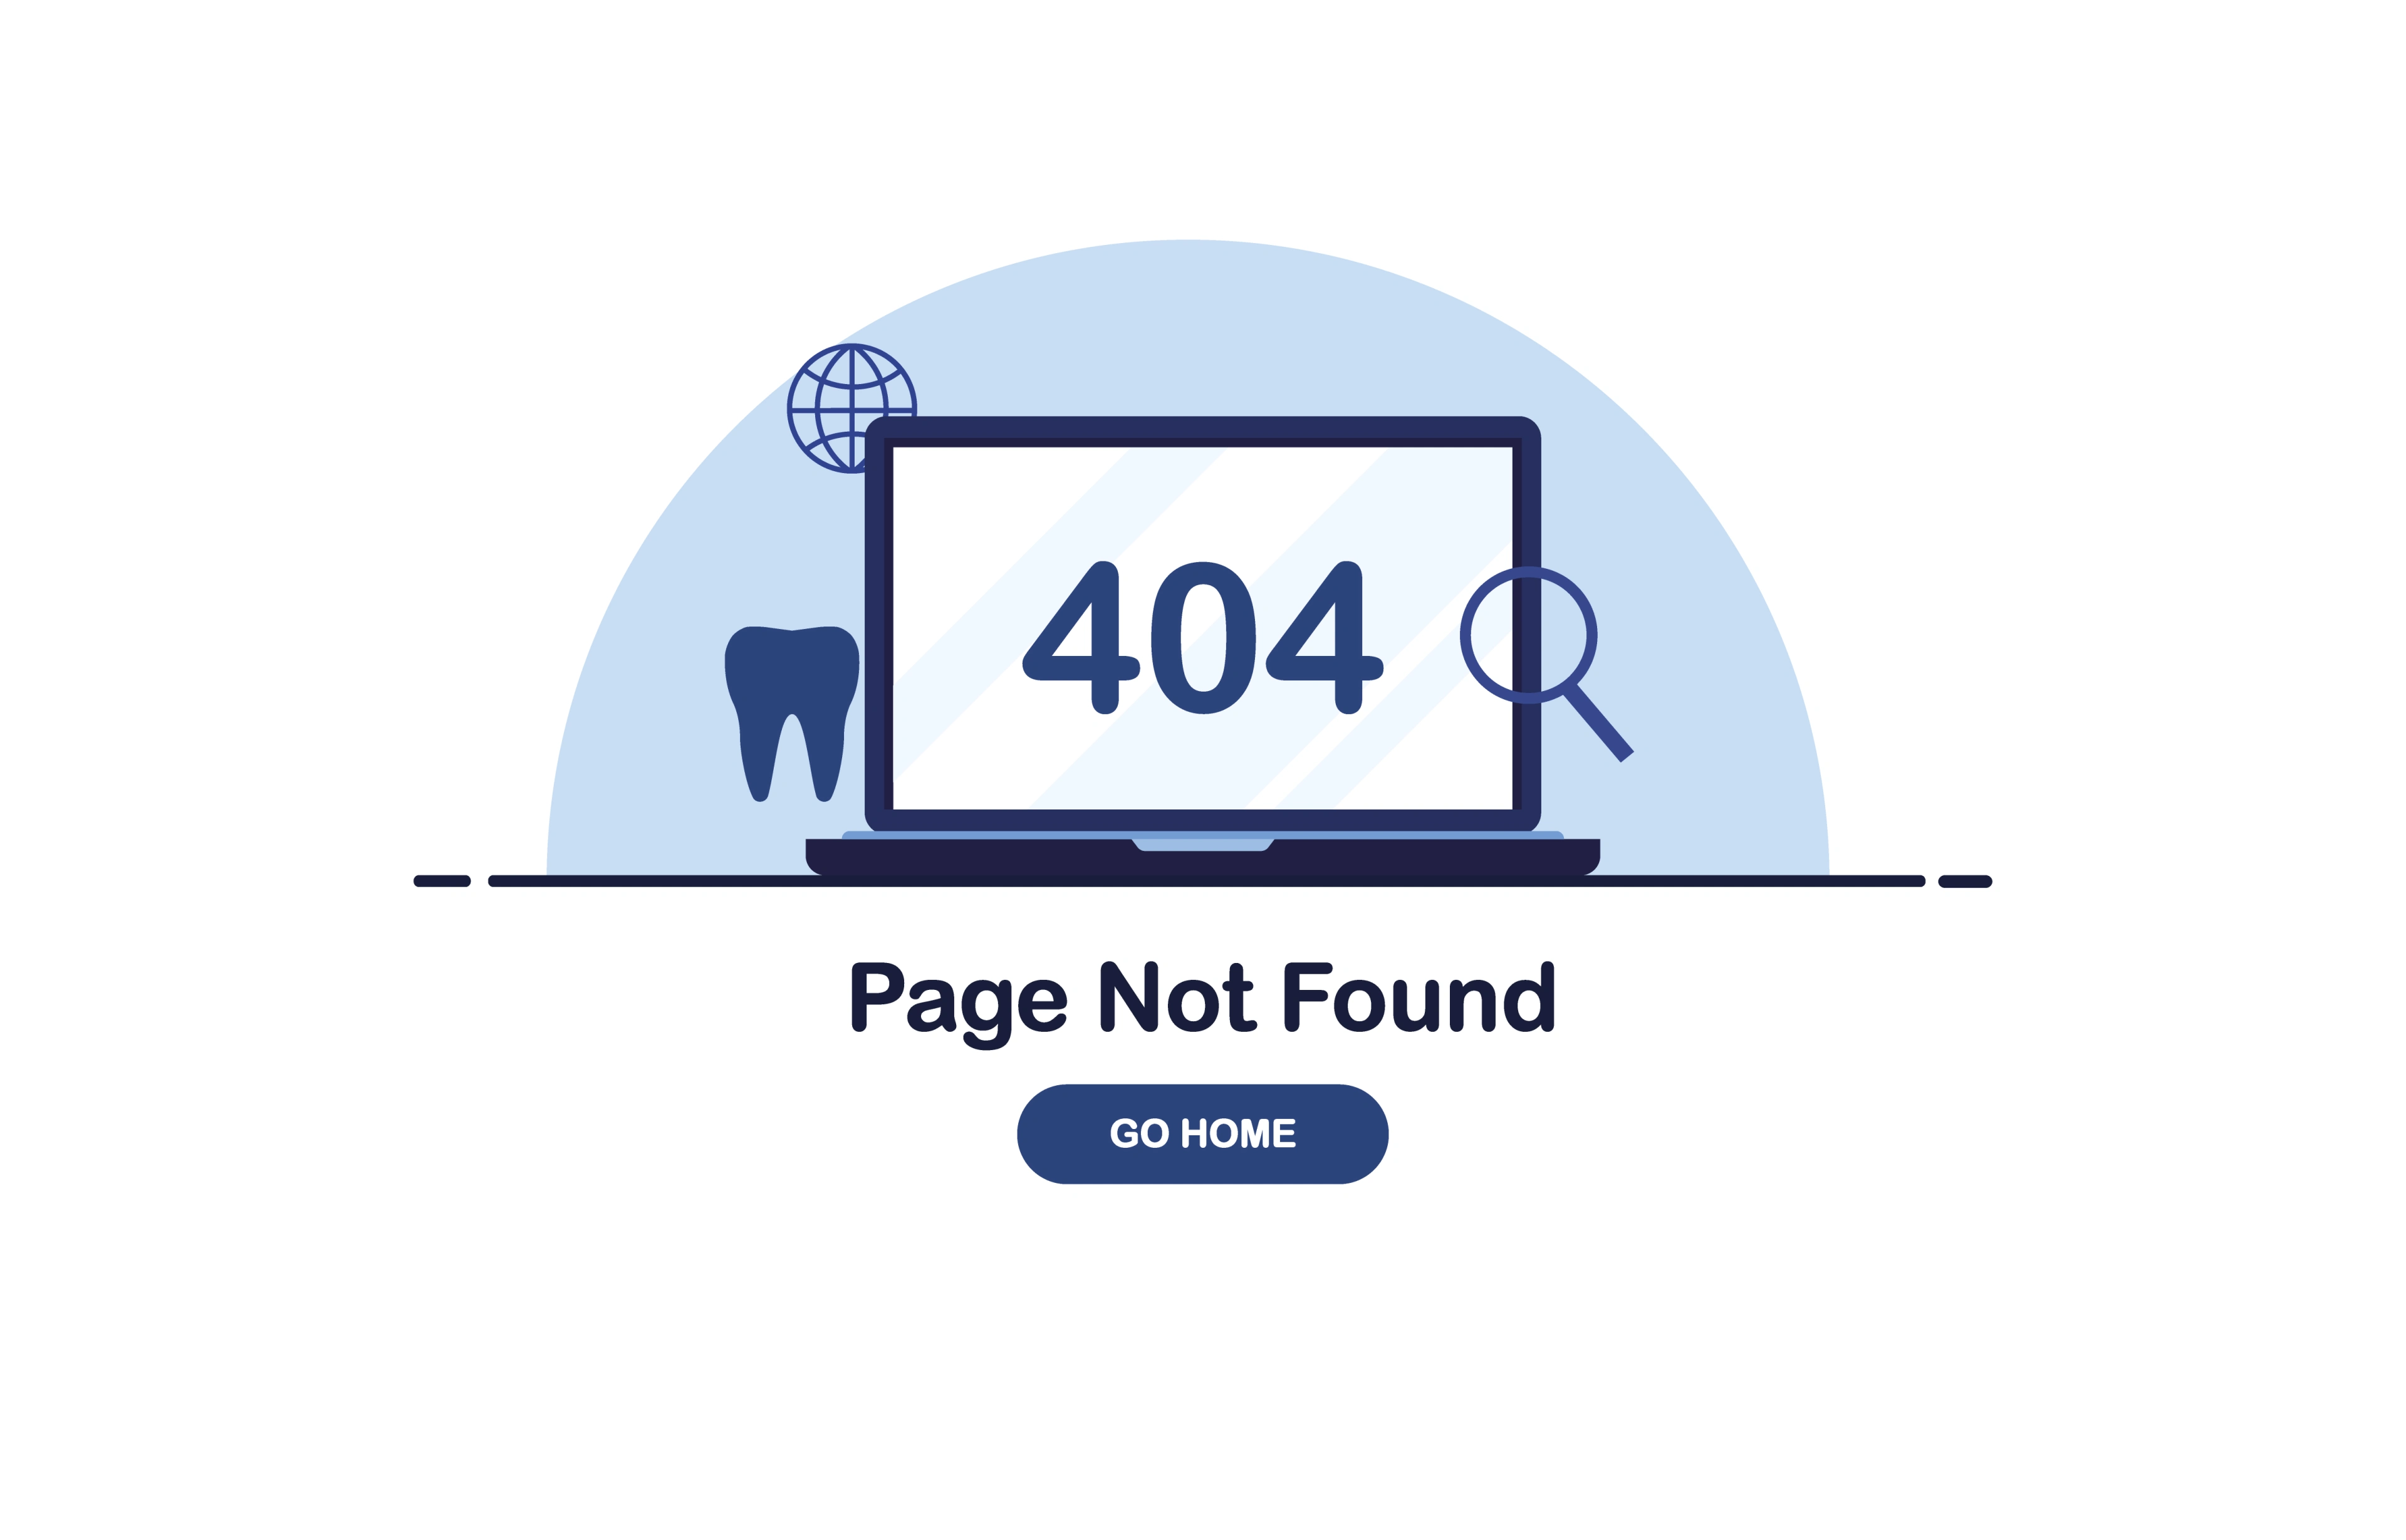 Sorry, the page you requested cannot be found, please visit our other pages for professional dental information.